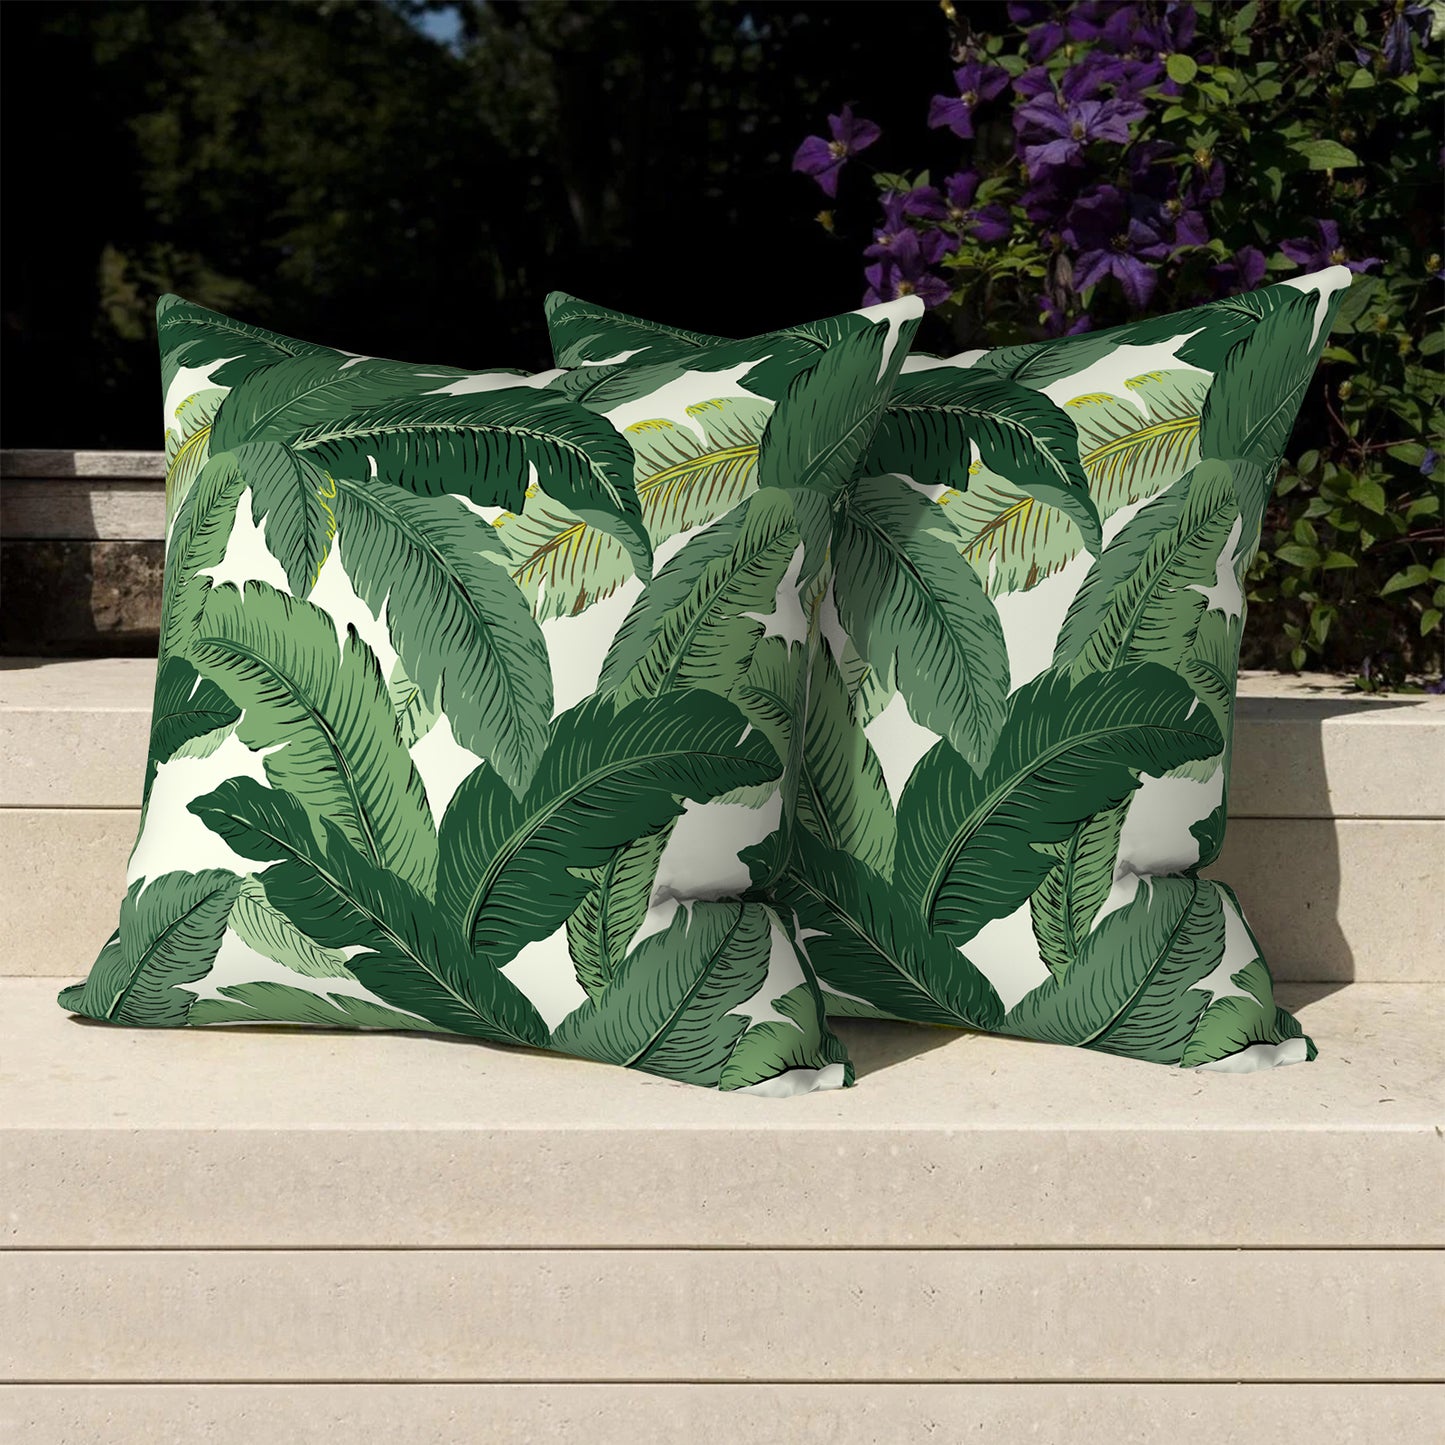 Melody Elephant Pack of 2 Patio Throw Pillow Covers ONLY, Water Repellent Cushion Cases 20x20 Inch, Square Pillowcases for Outdoor Couch Decoration, Swaying Palms Green